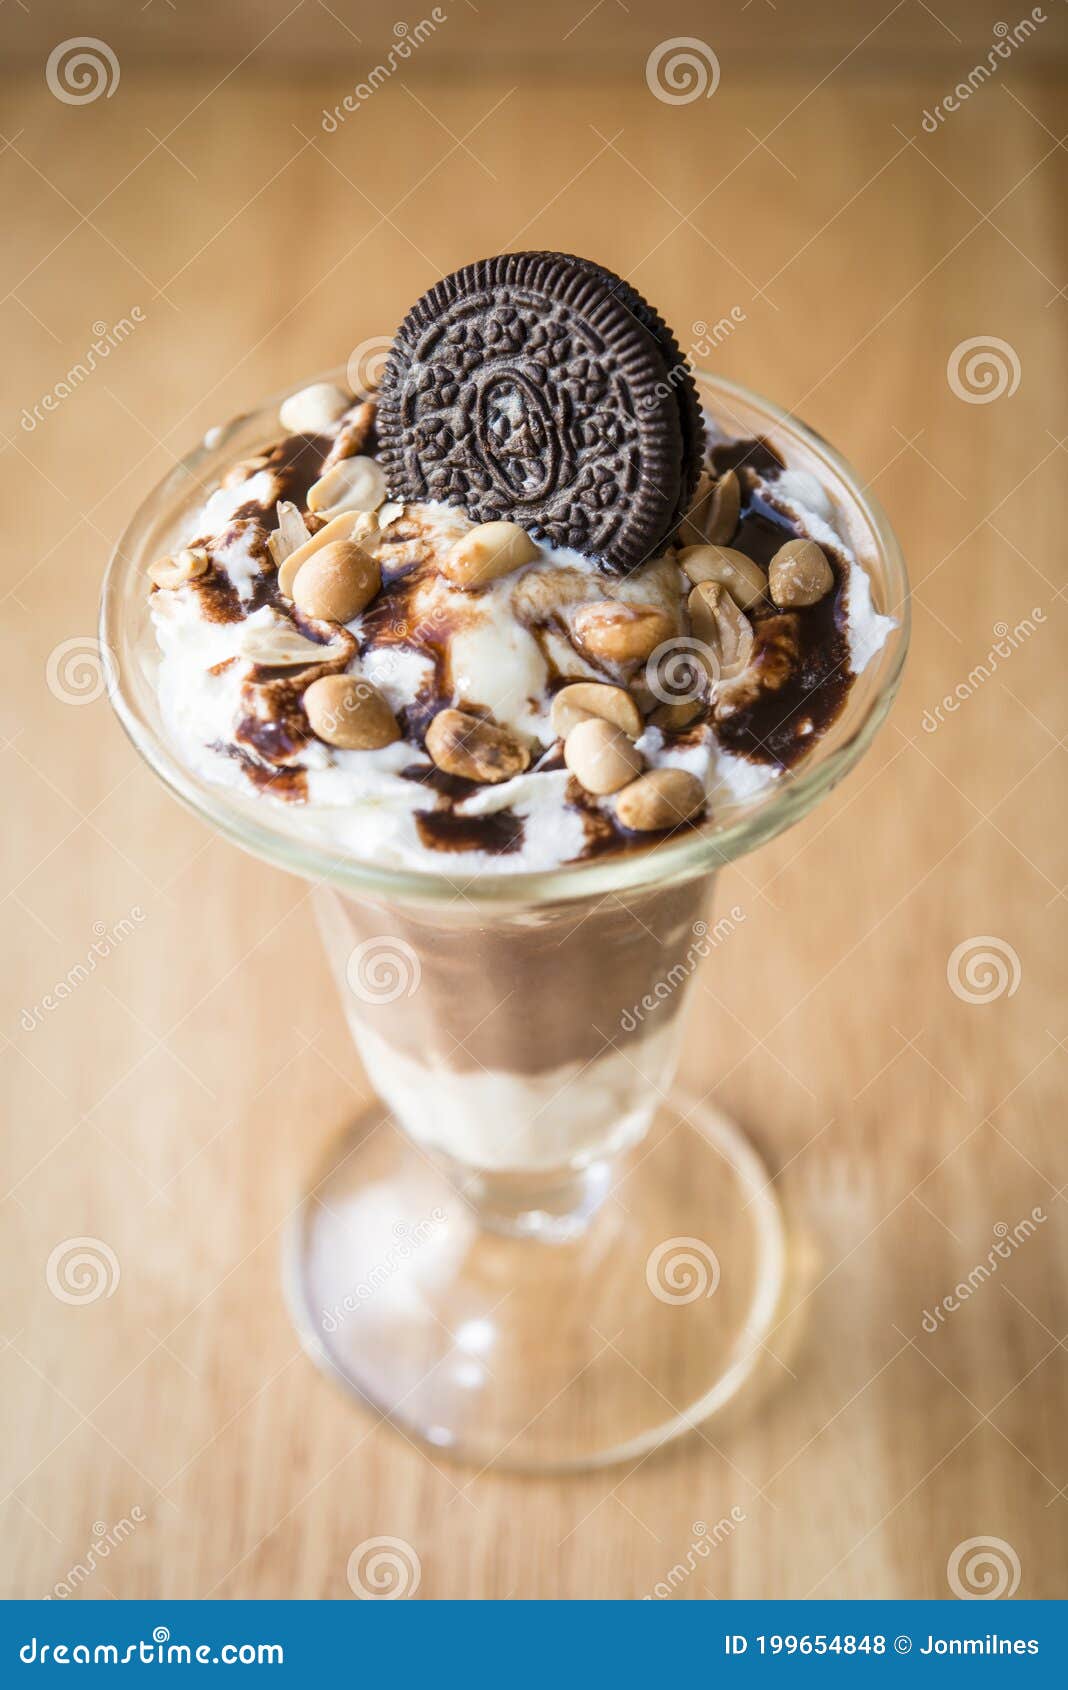 chocolate ice-cream sundae with biscuit on top for decor